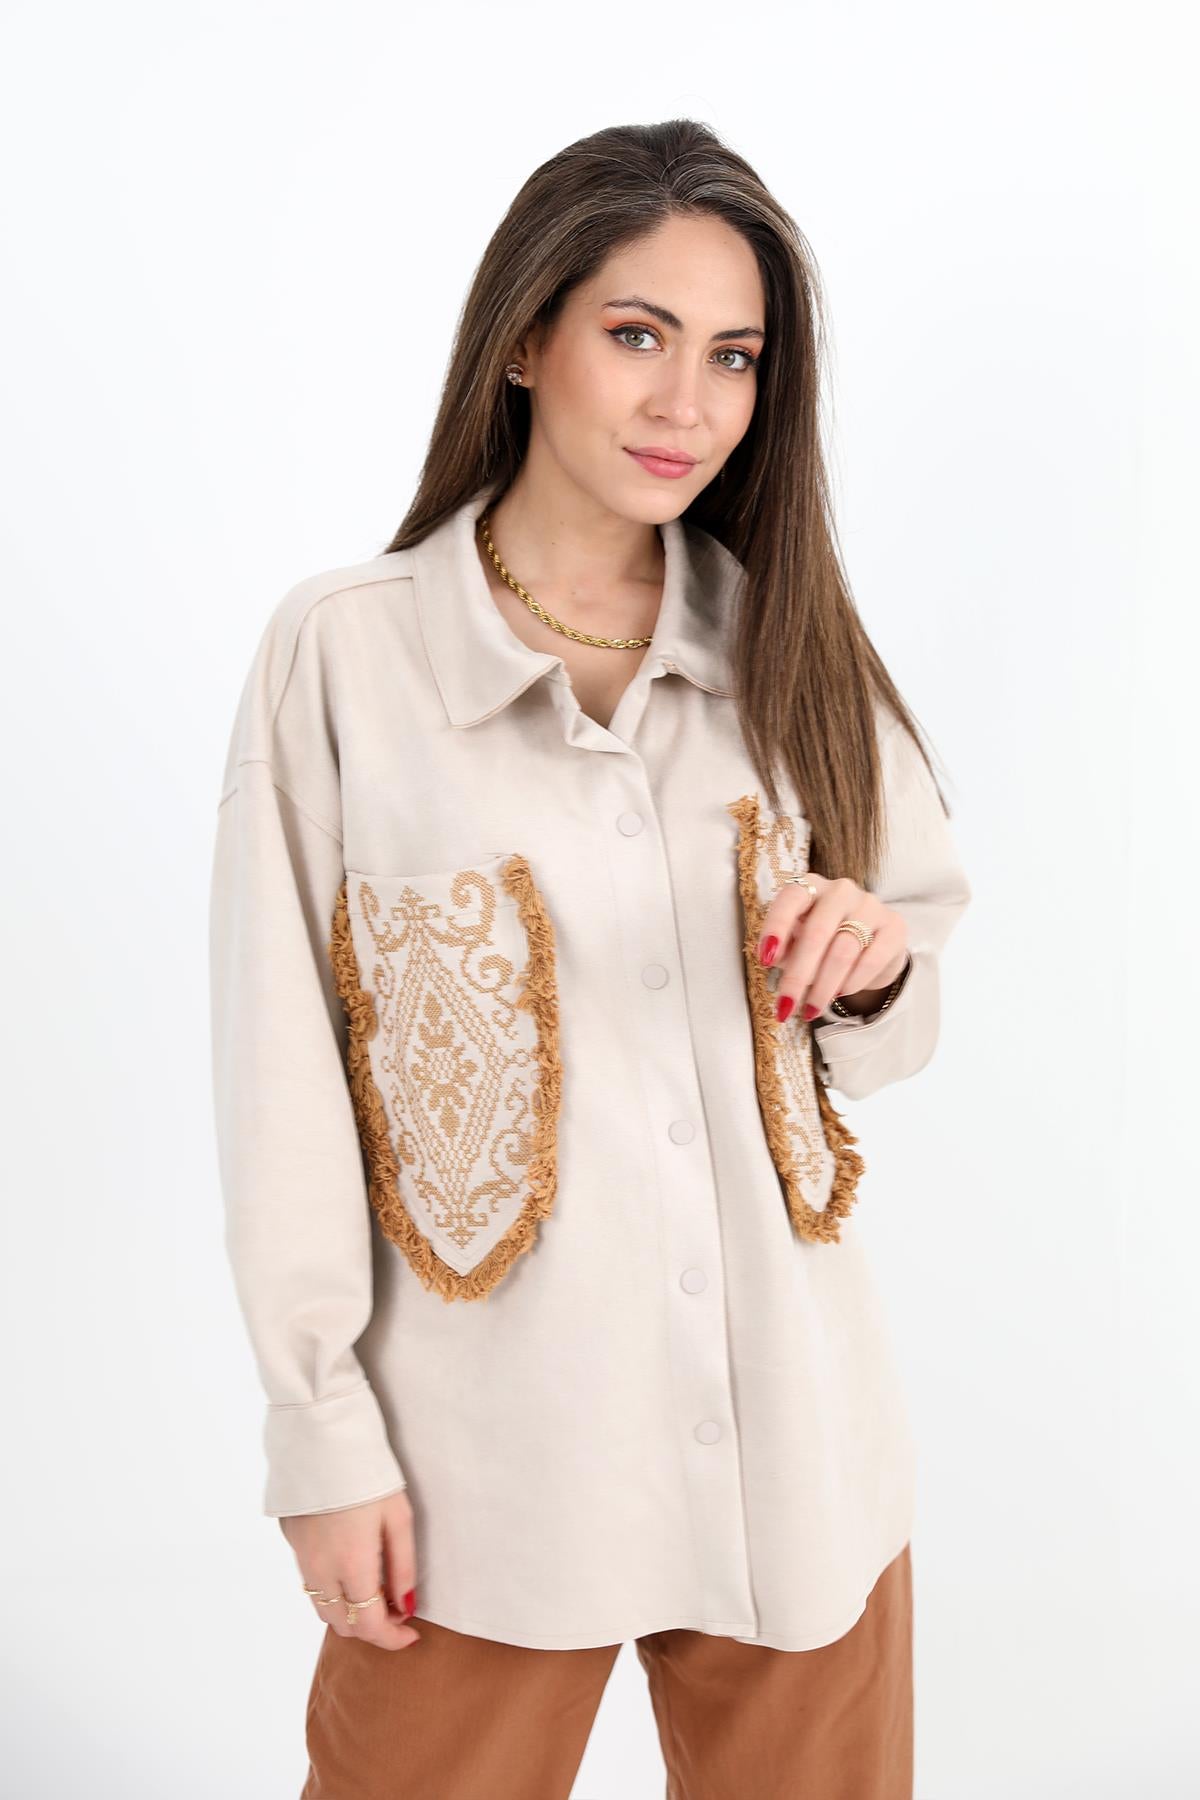 Women's Shirt Pocket Tasseled Embroidered Suede - Stone - STREETMODE ™